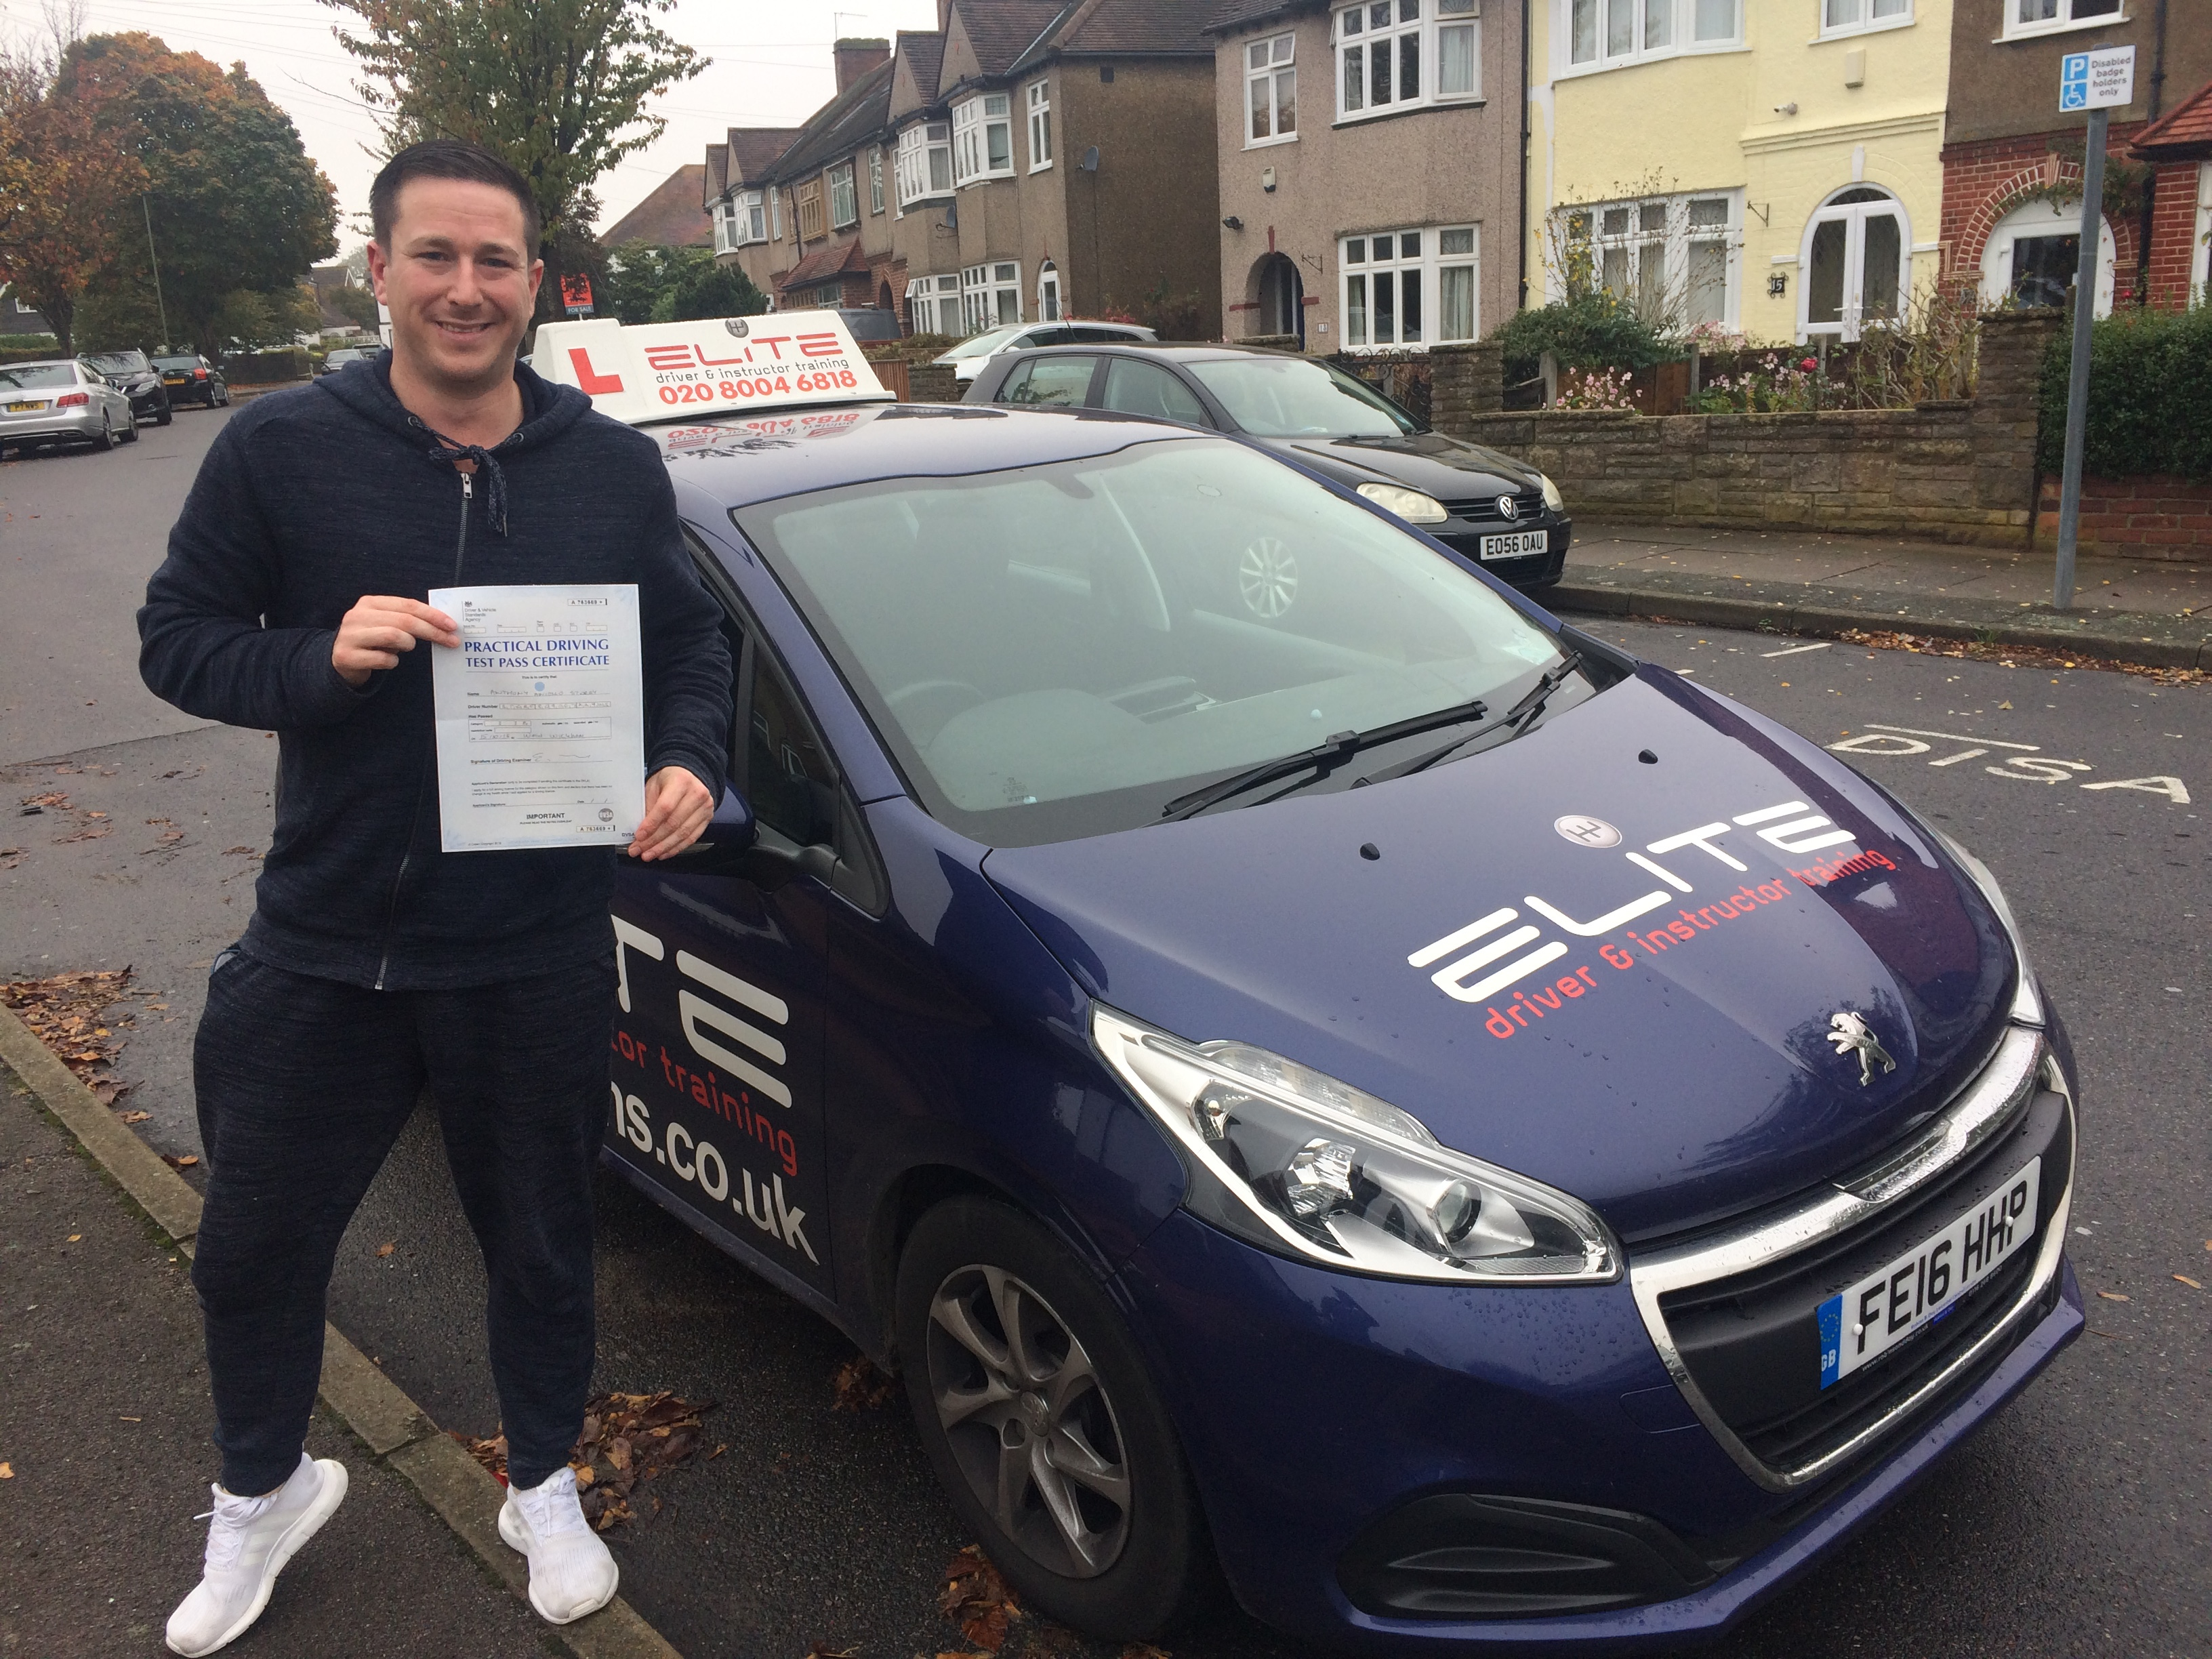 And another #firsttimepass yesterday at #WestWickham for Matt's pupil Anthony! #ELITEInstructors #winning in #Croydon